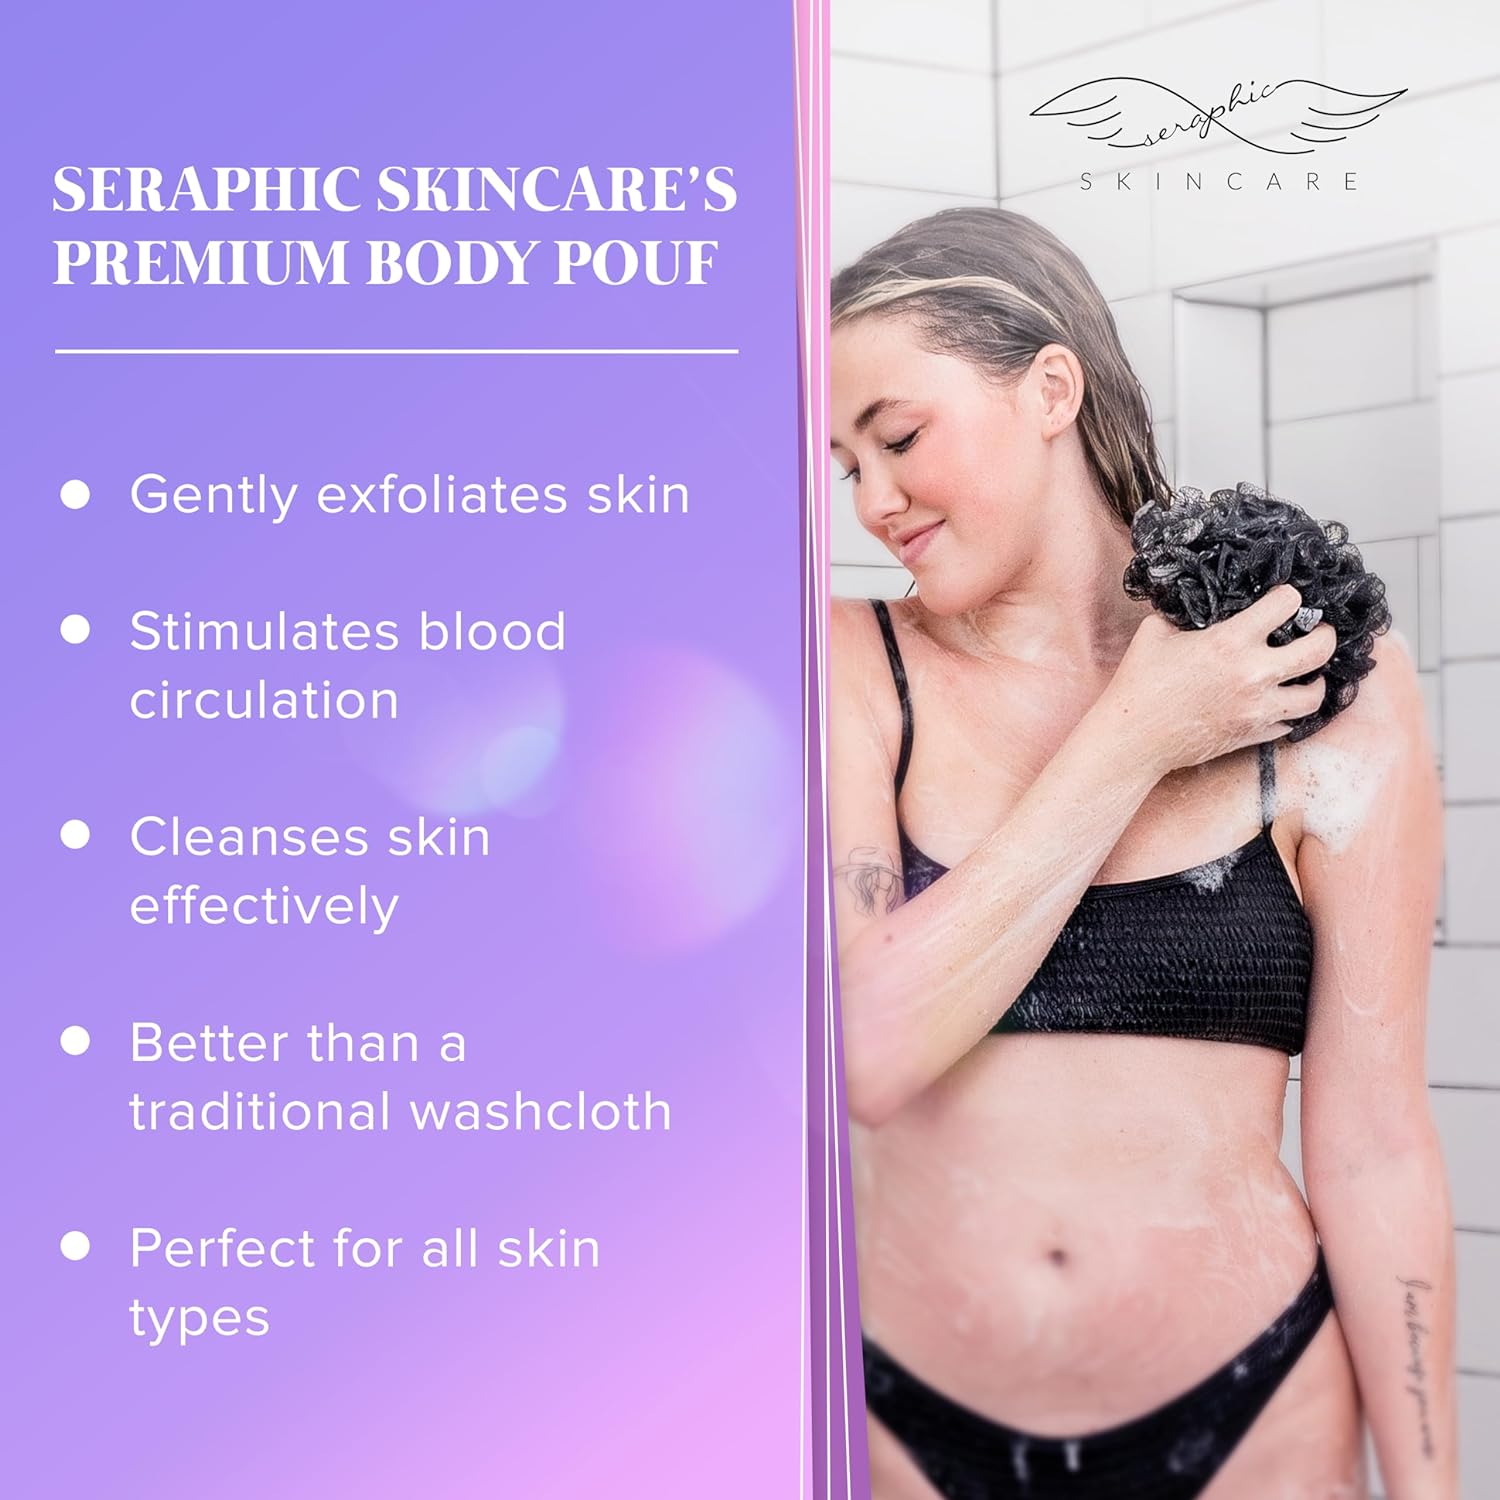 Seraphic Skincare Premium Body Pouf Loofah – 100g Shower Pouf Body Exfoliator for Gentle Exfoliation and Cleansing – Premium Exfoliating Body Scrubber to Reveal Silky Smooth, Glowing Skin (Black) : Beauty & Personal Care